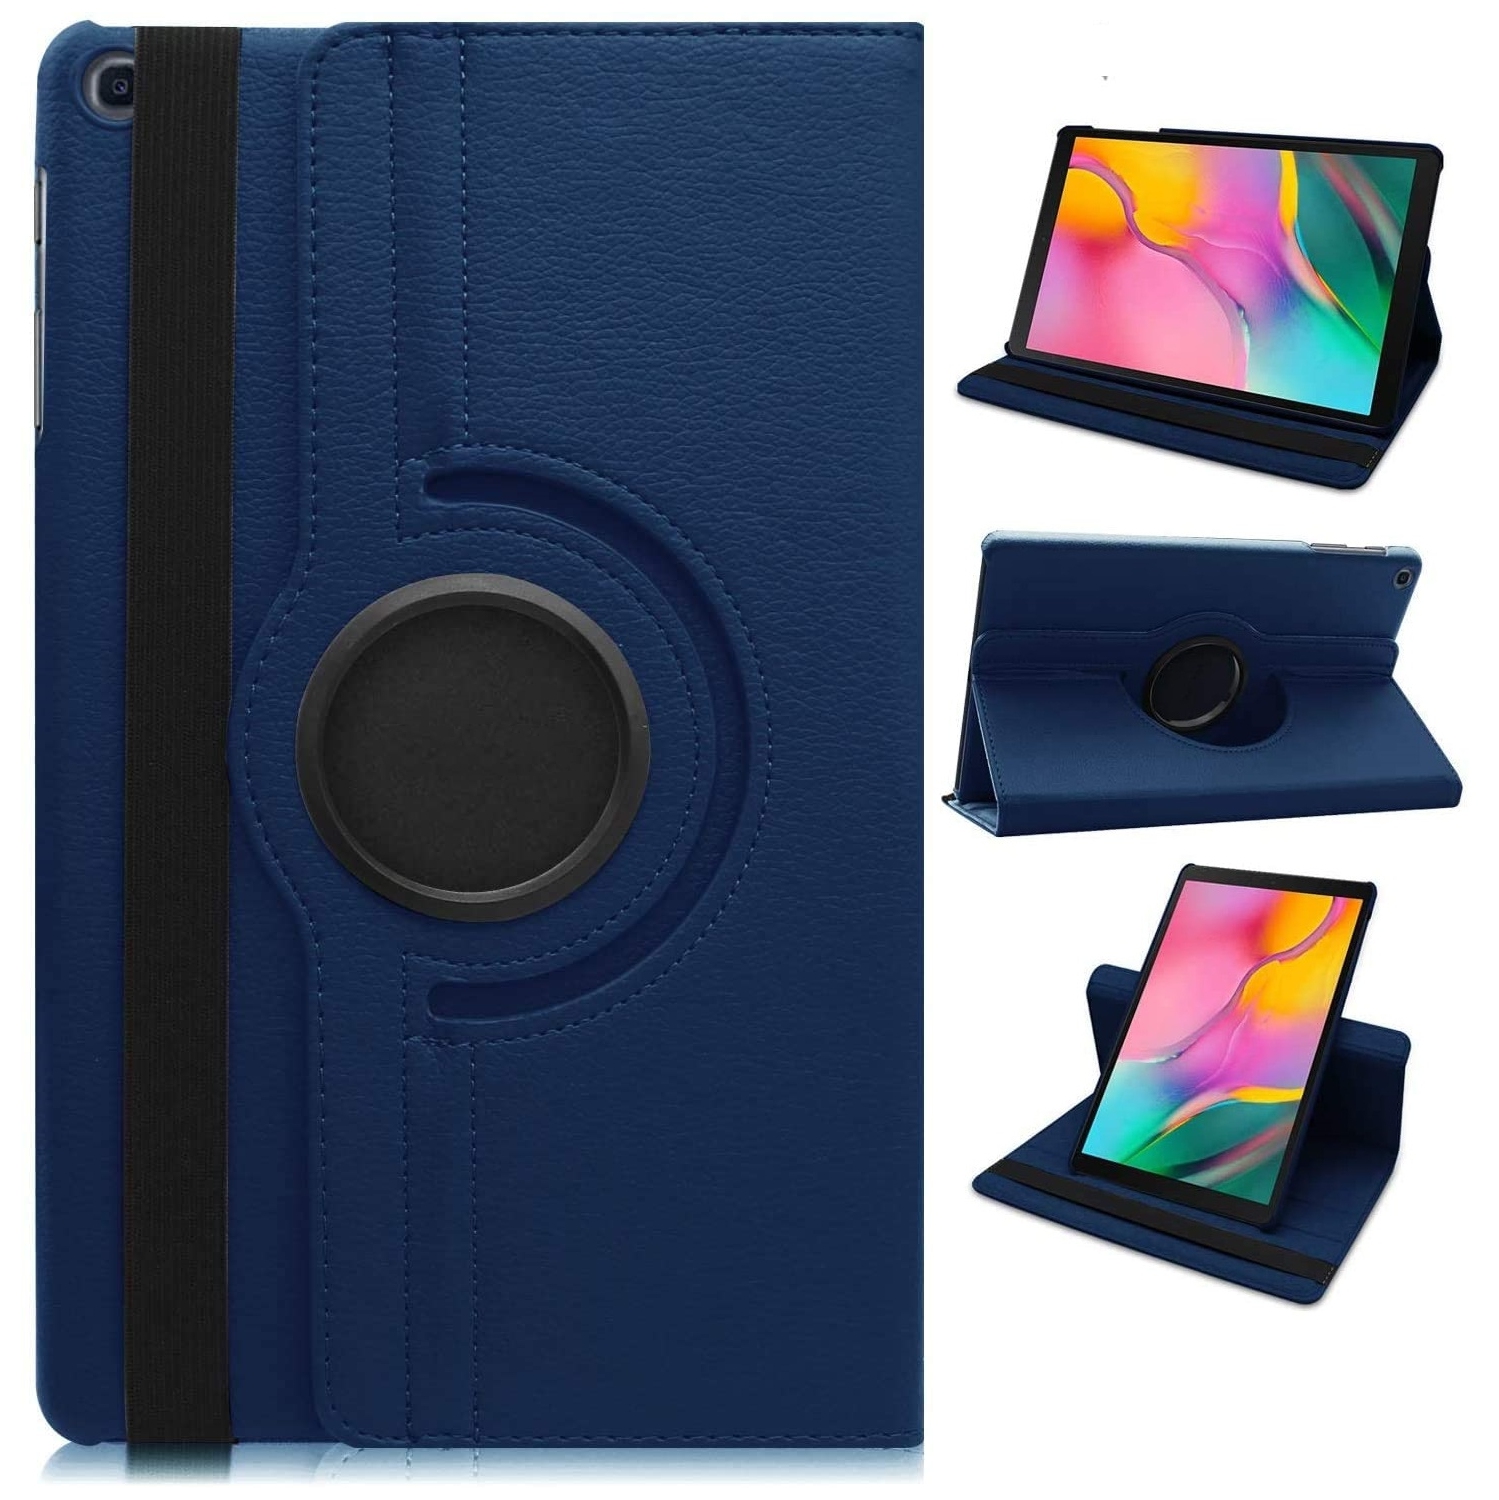 【CSmart】 360 Rotating PU Leather Stand Case Smart Cover for Samsung Galaxy Tab S6 Lite, P610 P615, Navy